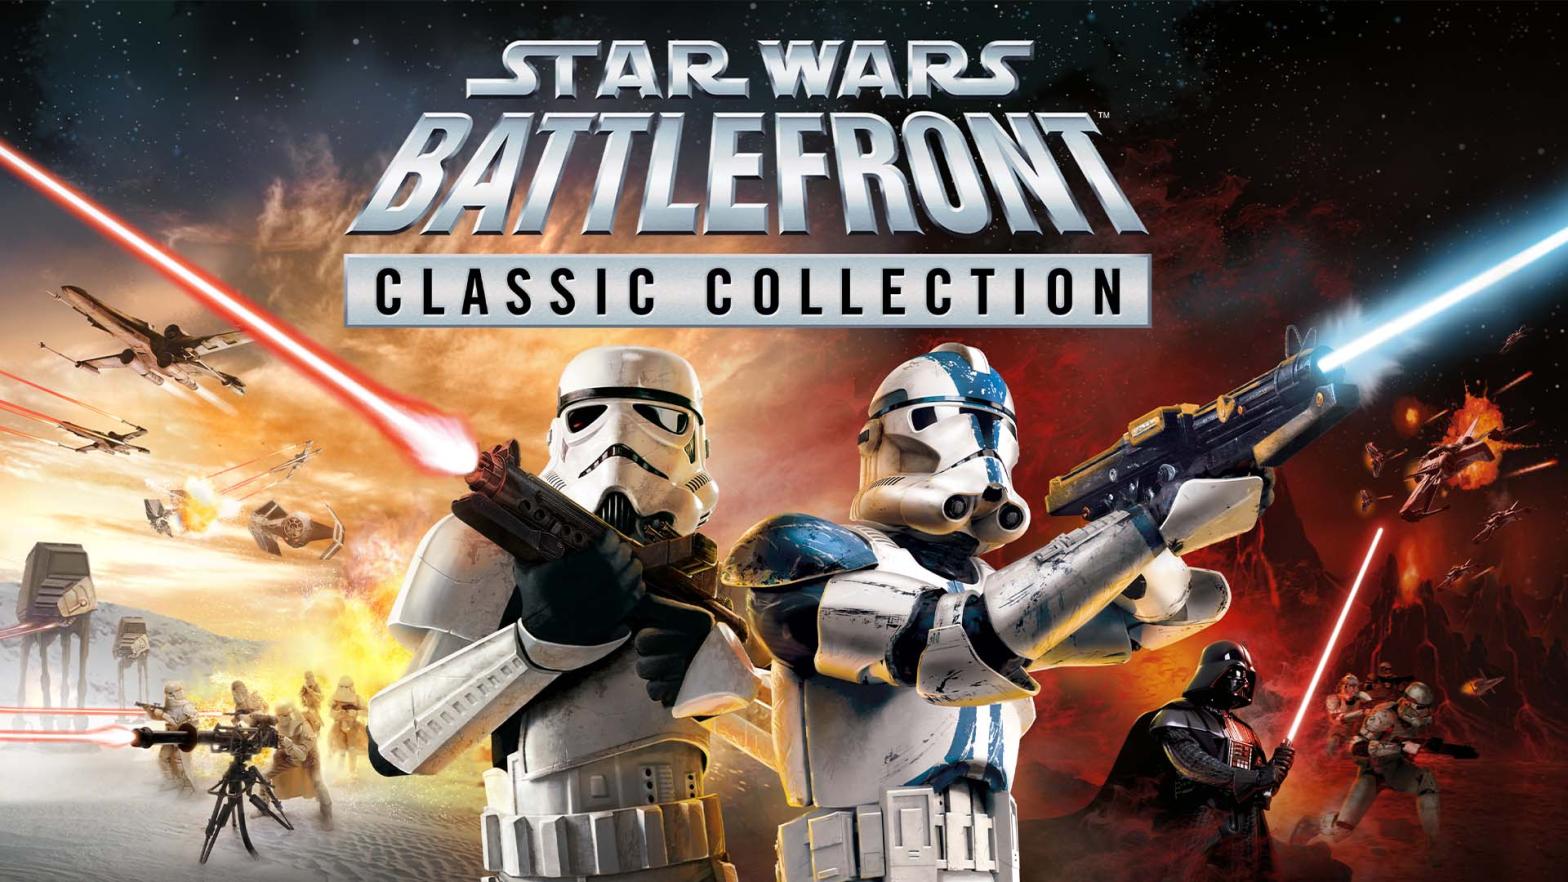 OG Star Wars: Battlefront Games Are Back With Bonus Content And Features